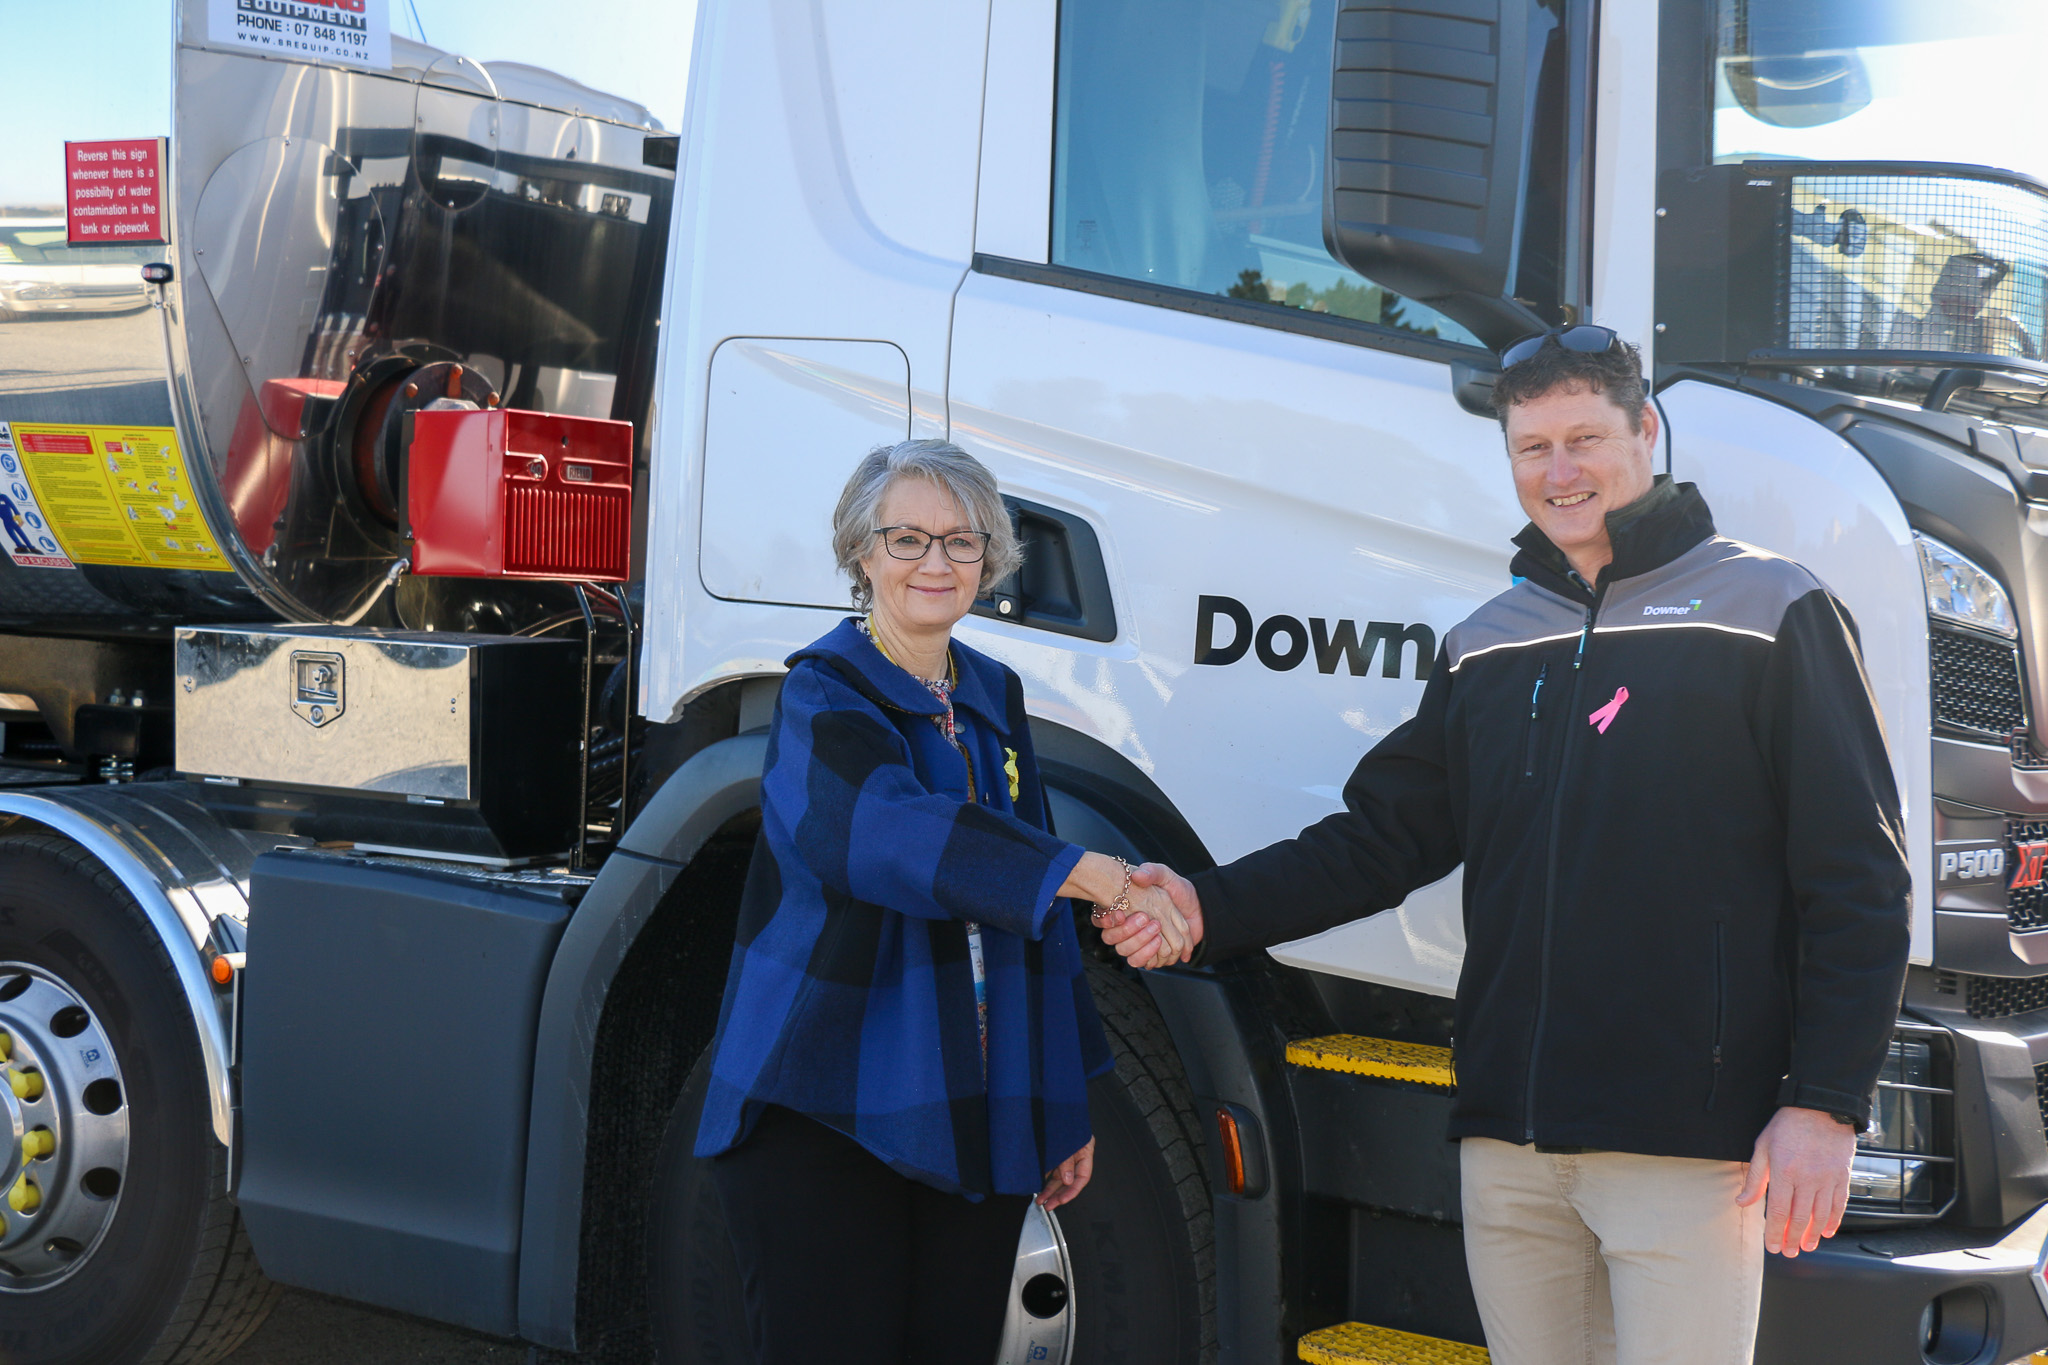 Left to right: Dawn Inglis, Group manager Service Delivery and Chris Seath, Downer Waikato regional manager.